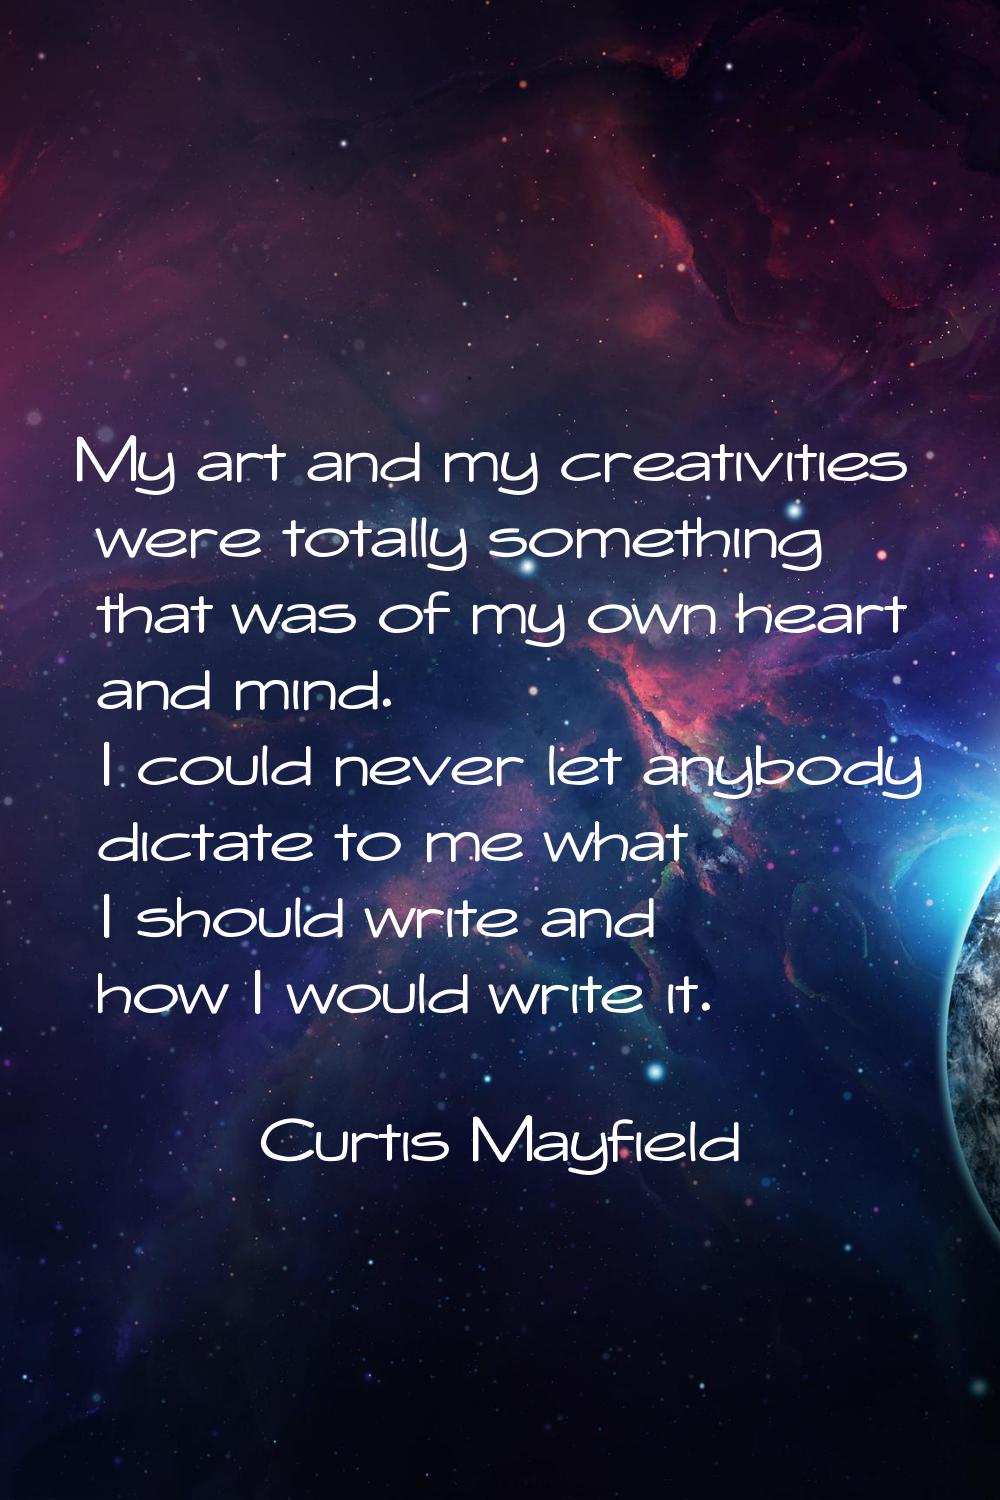 My art and my creativities were totally something that was of my own heart and mind. I could never 